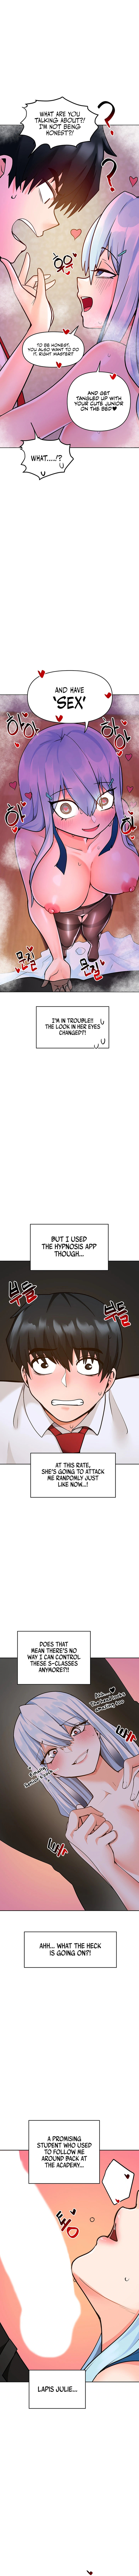 The Hypnosis App was Fake - Chapter 19 Page 13